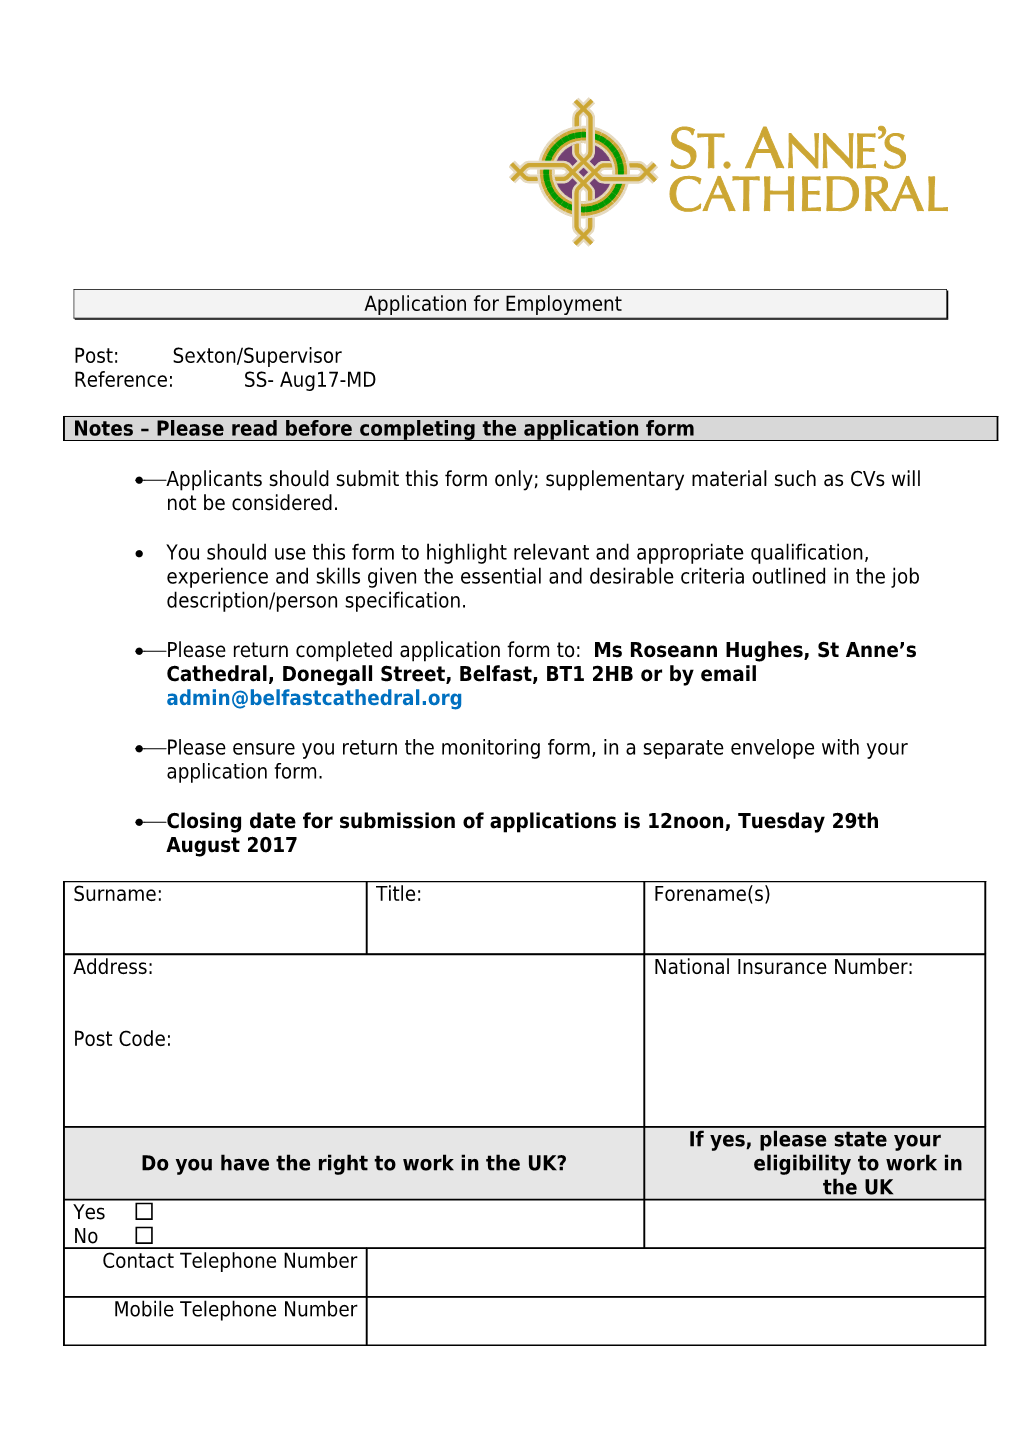 Notes Please Read Before Completing the Application Form